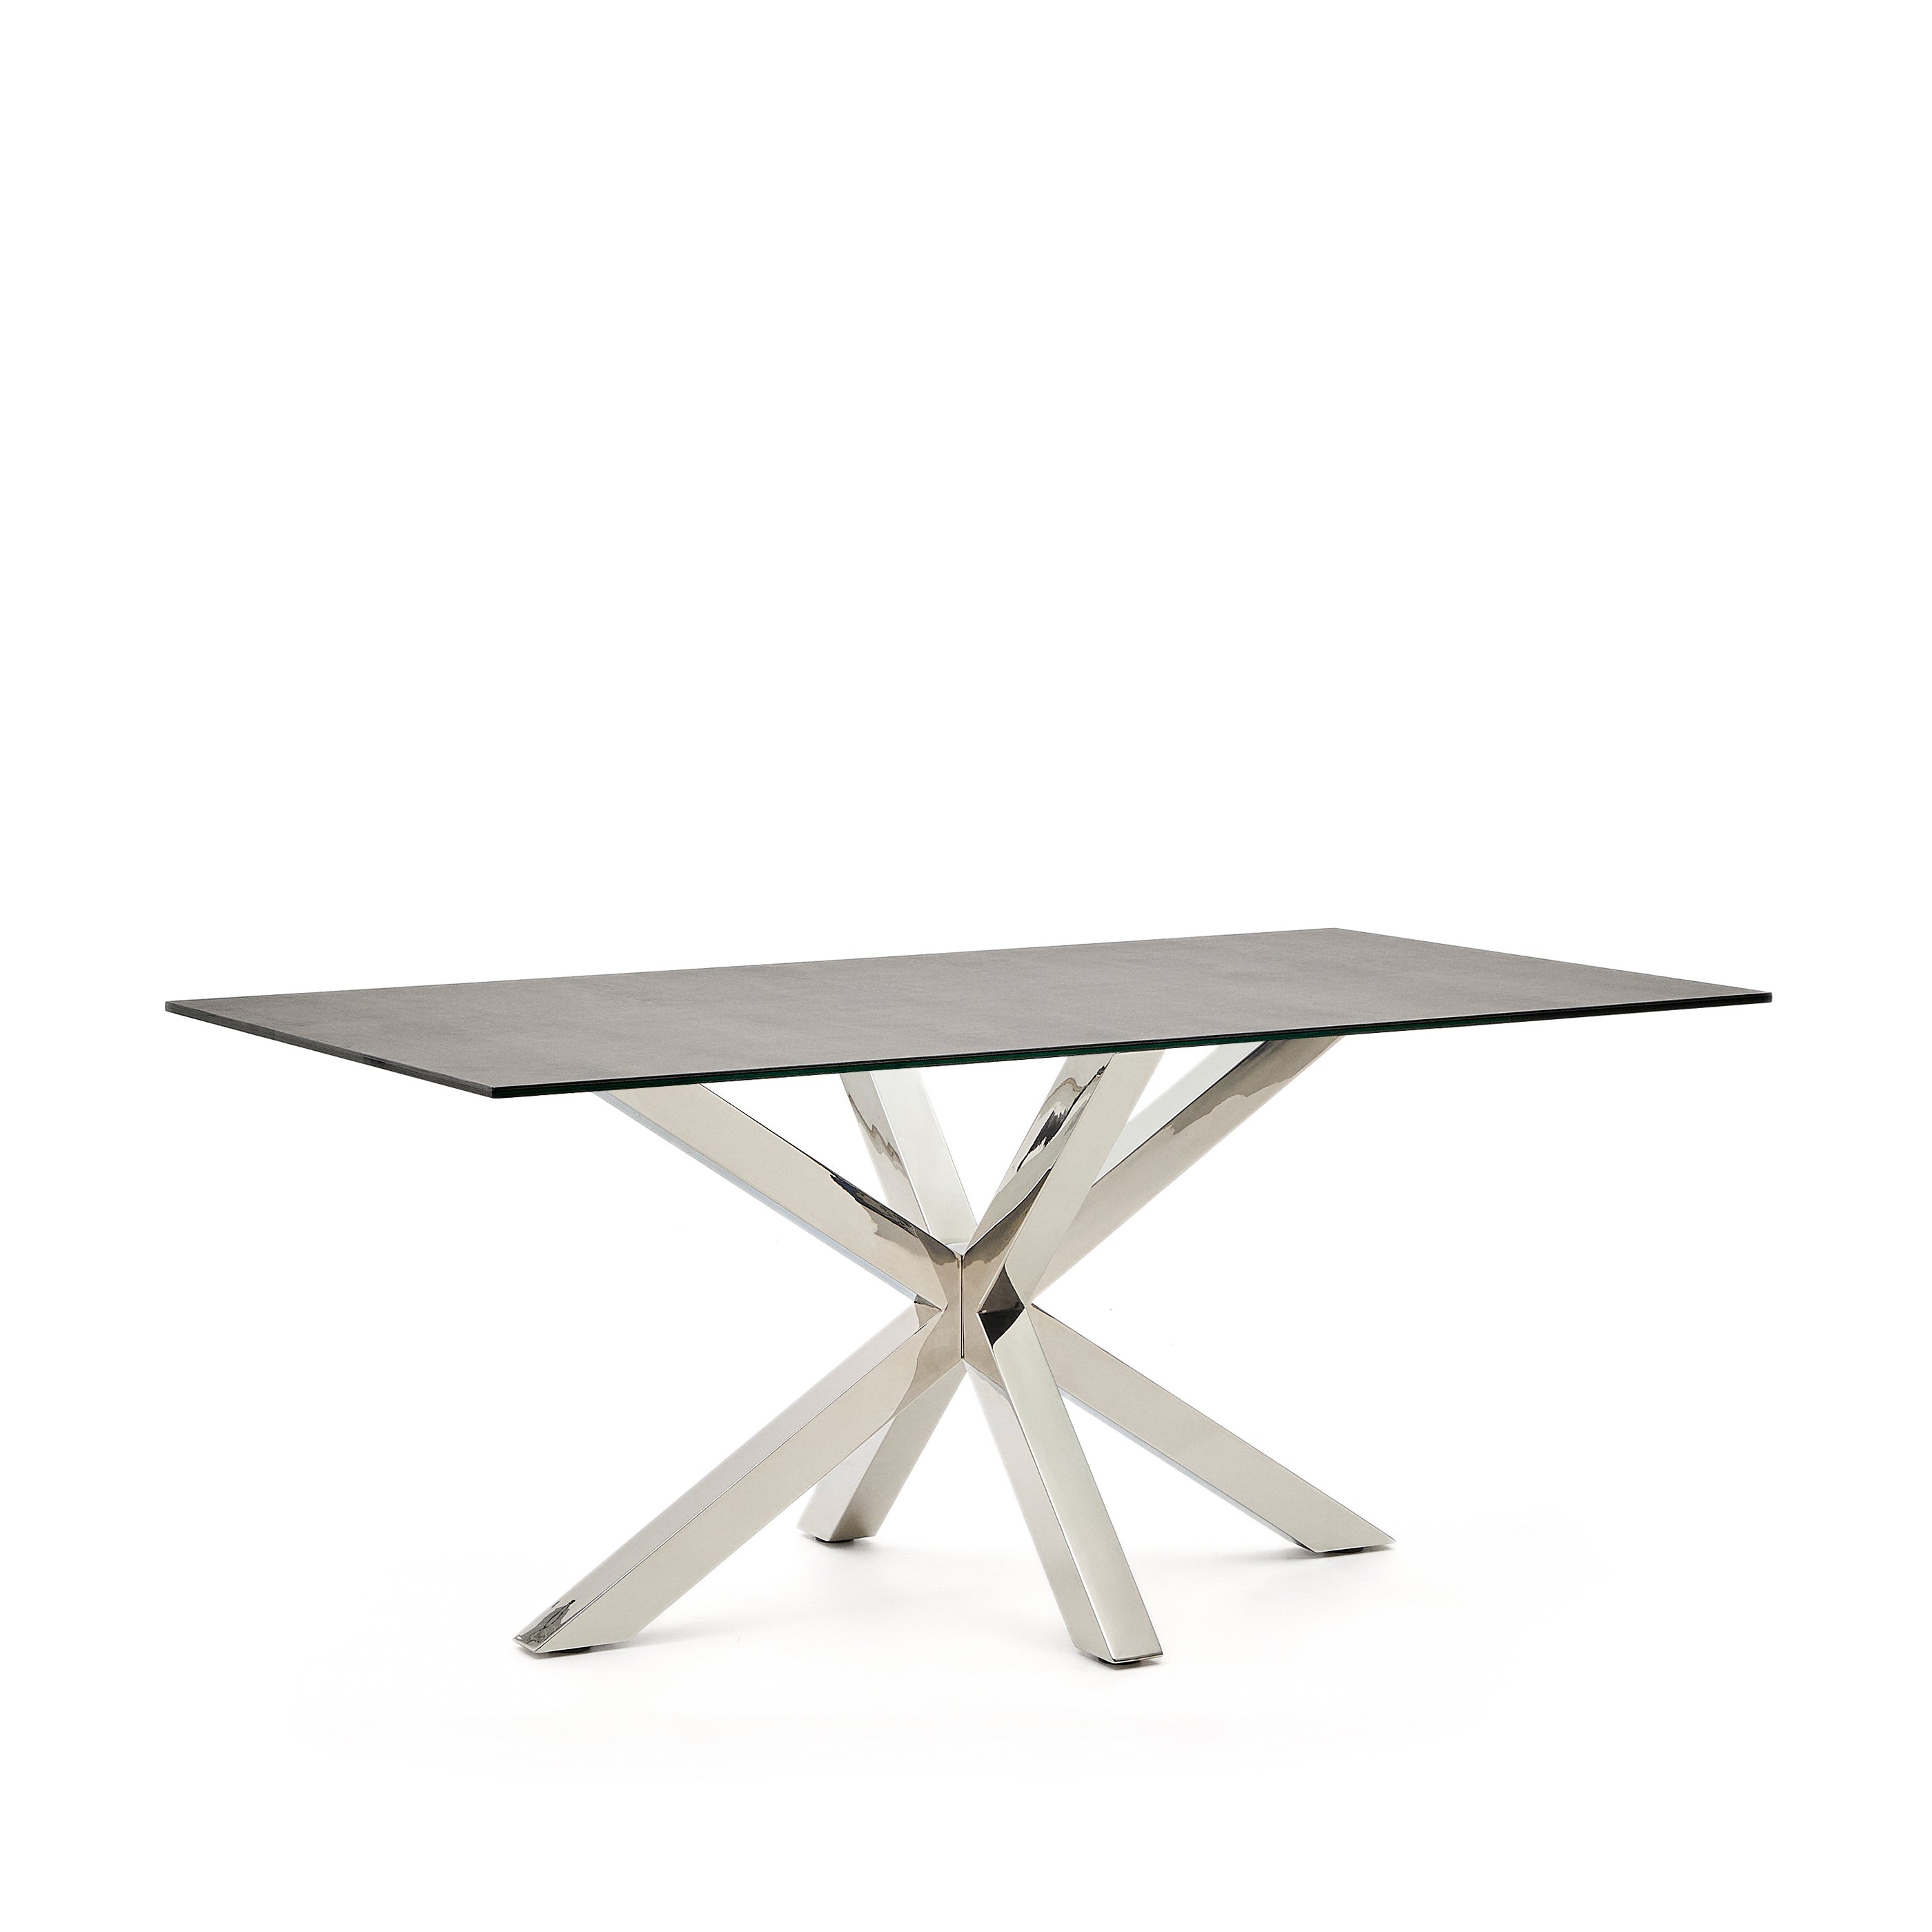 Argo table Iron Moss porcelain and stainless steel legs, 160 x 90 cm